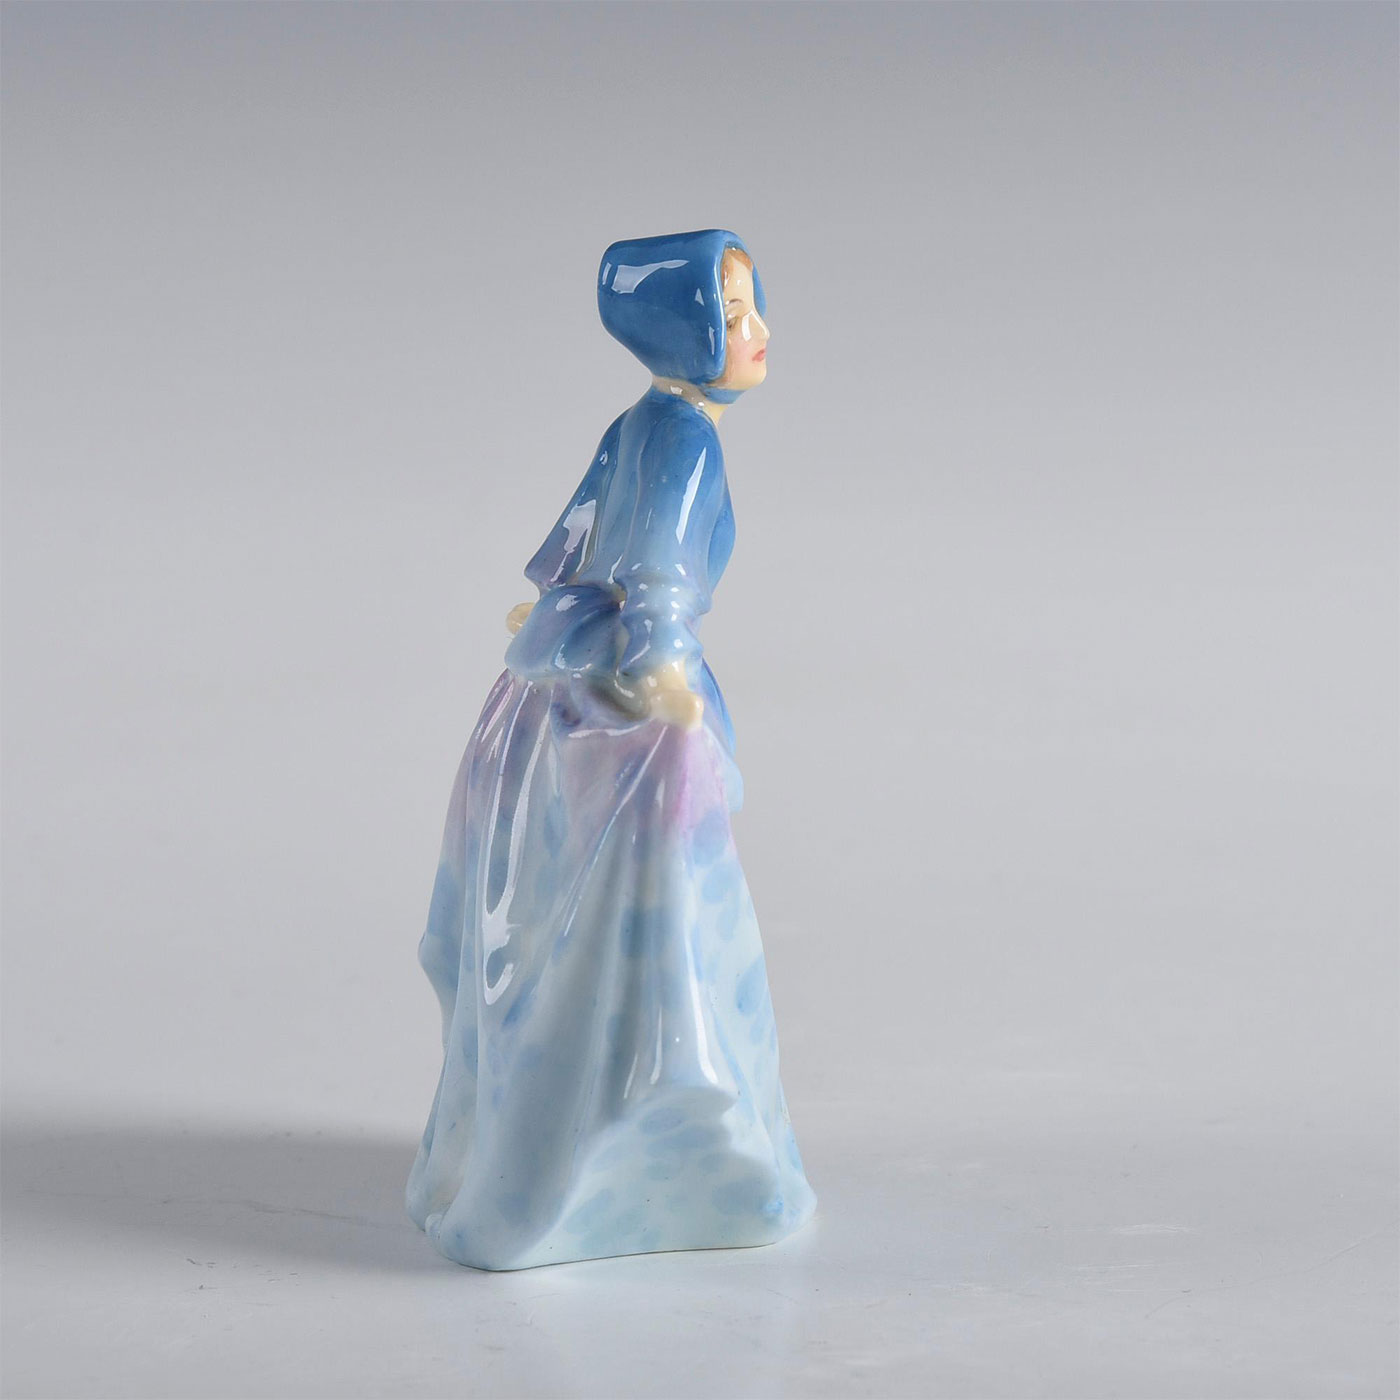 ROYAL DOULTON MINIATURE FIGURINE, SWEET ANNE - Image 4 of 5